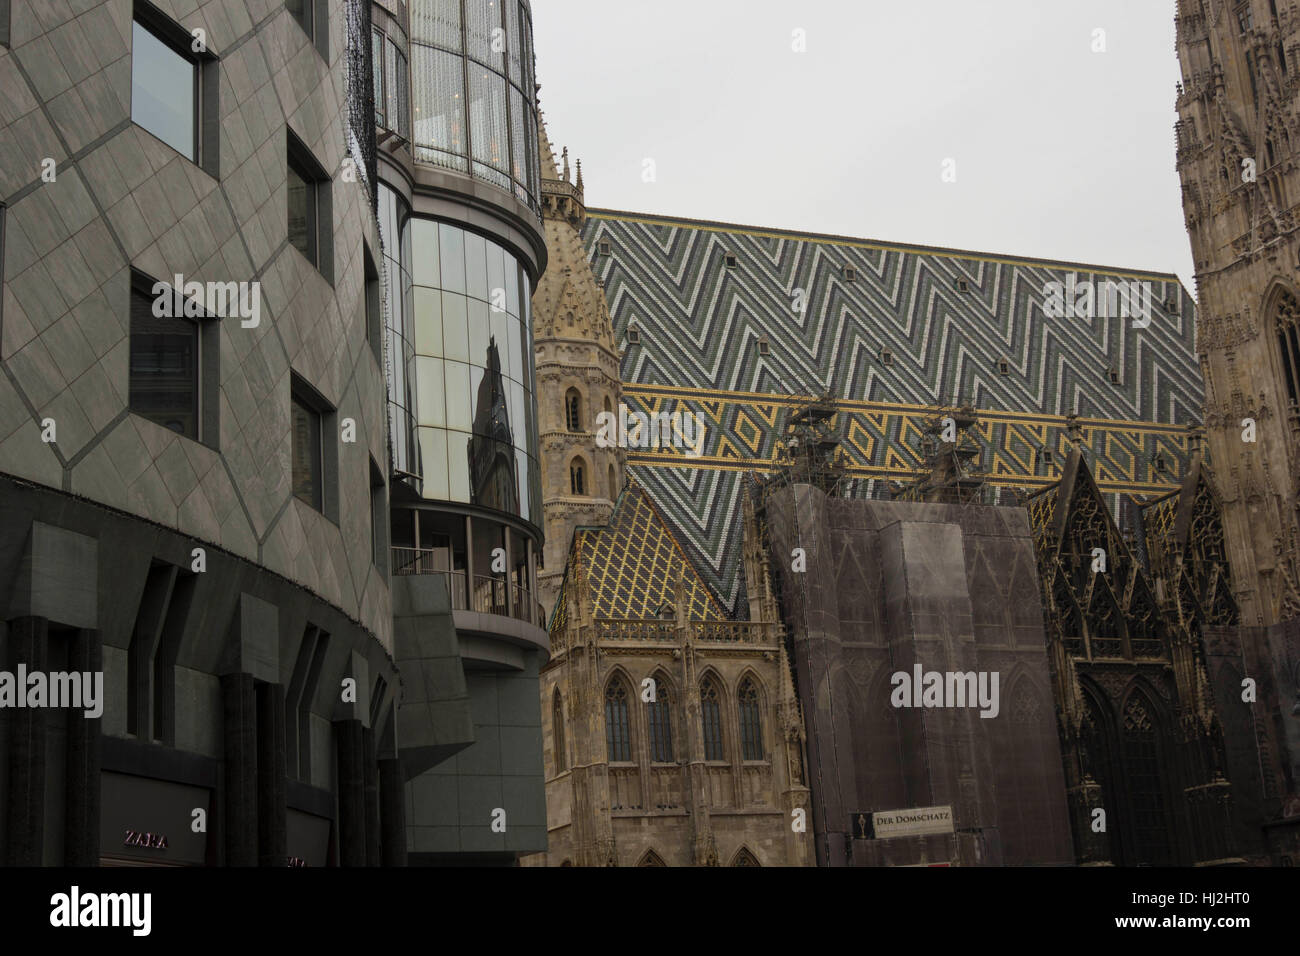 VIENNA, AUSTRIA - JANUARY 3 2016: Architectural close up of Haas Haus building and Stephansdom cathedral in Vienna, detail with no people Stock Photo